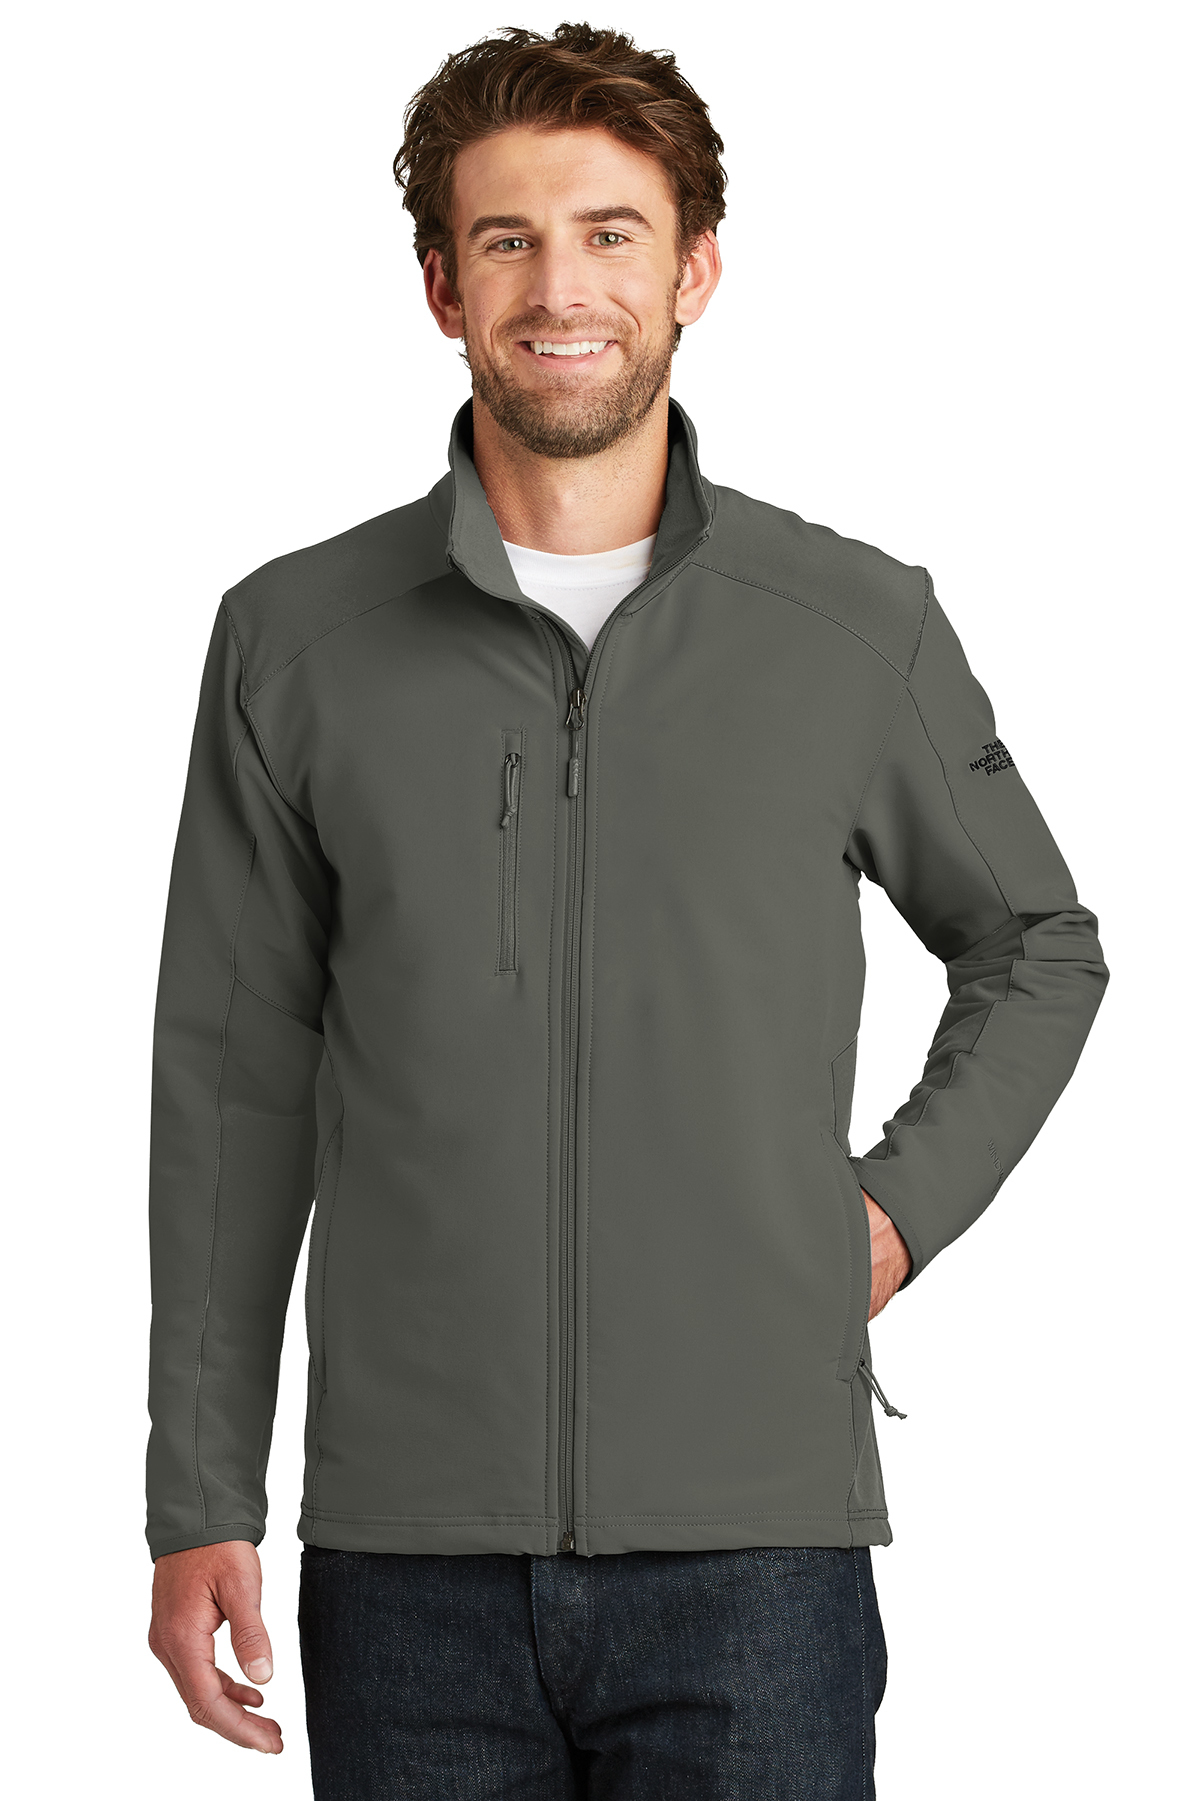 The North Face ® Tech Stretch Soft Shell Jacket | Product | SanMar